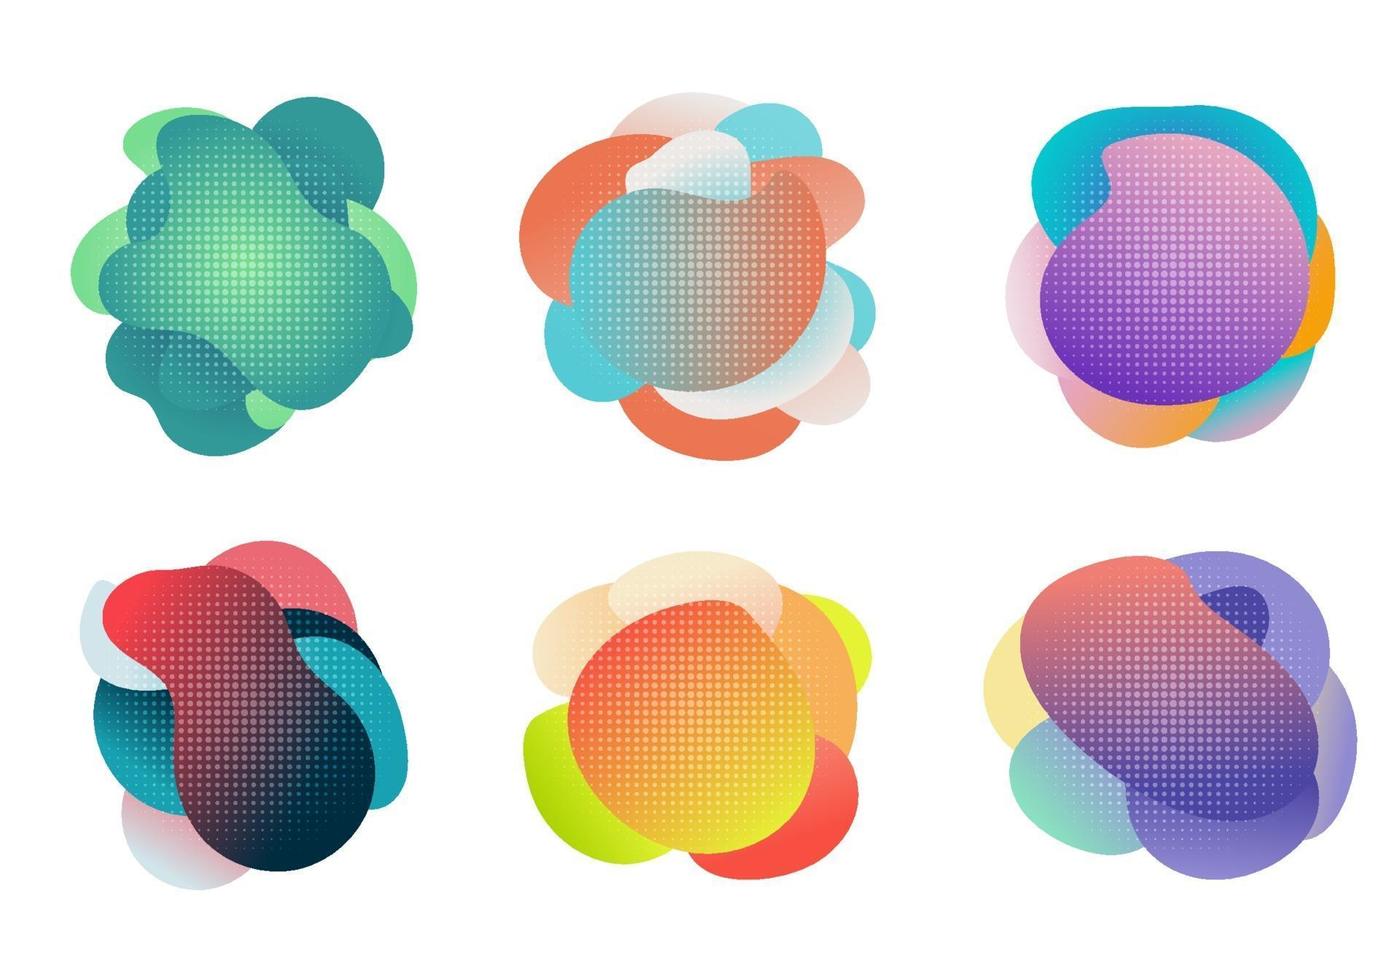 Badges set of fluid or liquid gradient shapes elements with halftone effect isolated on white background. vector